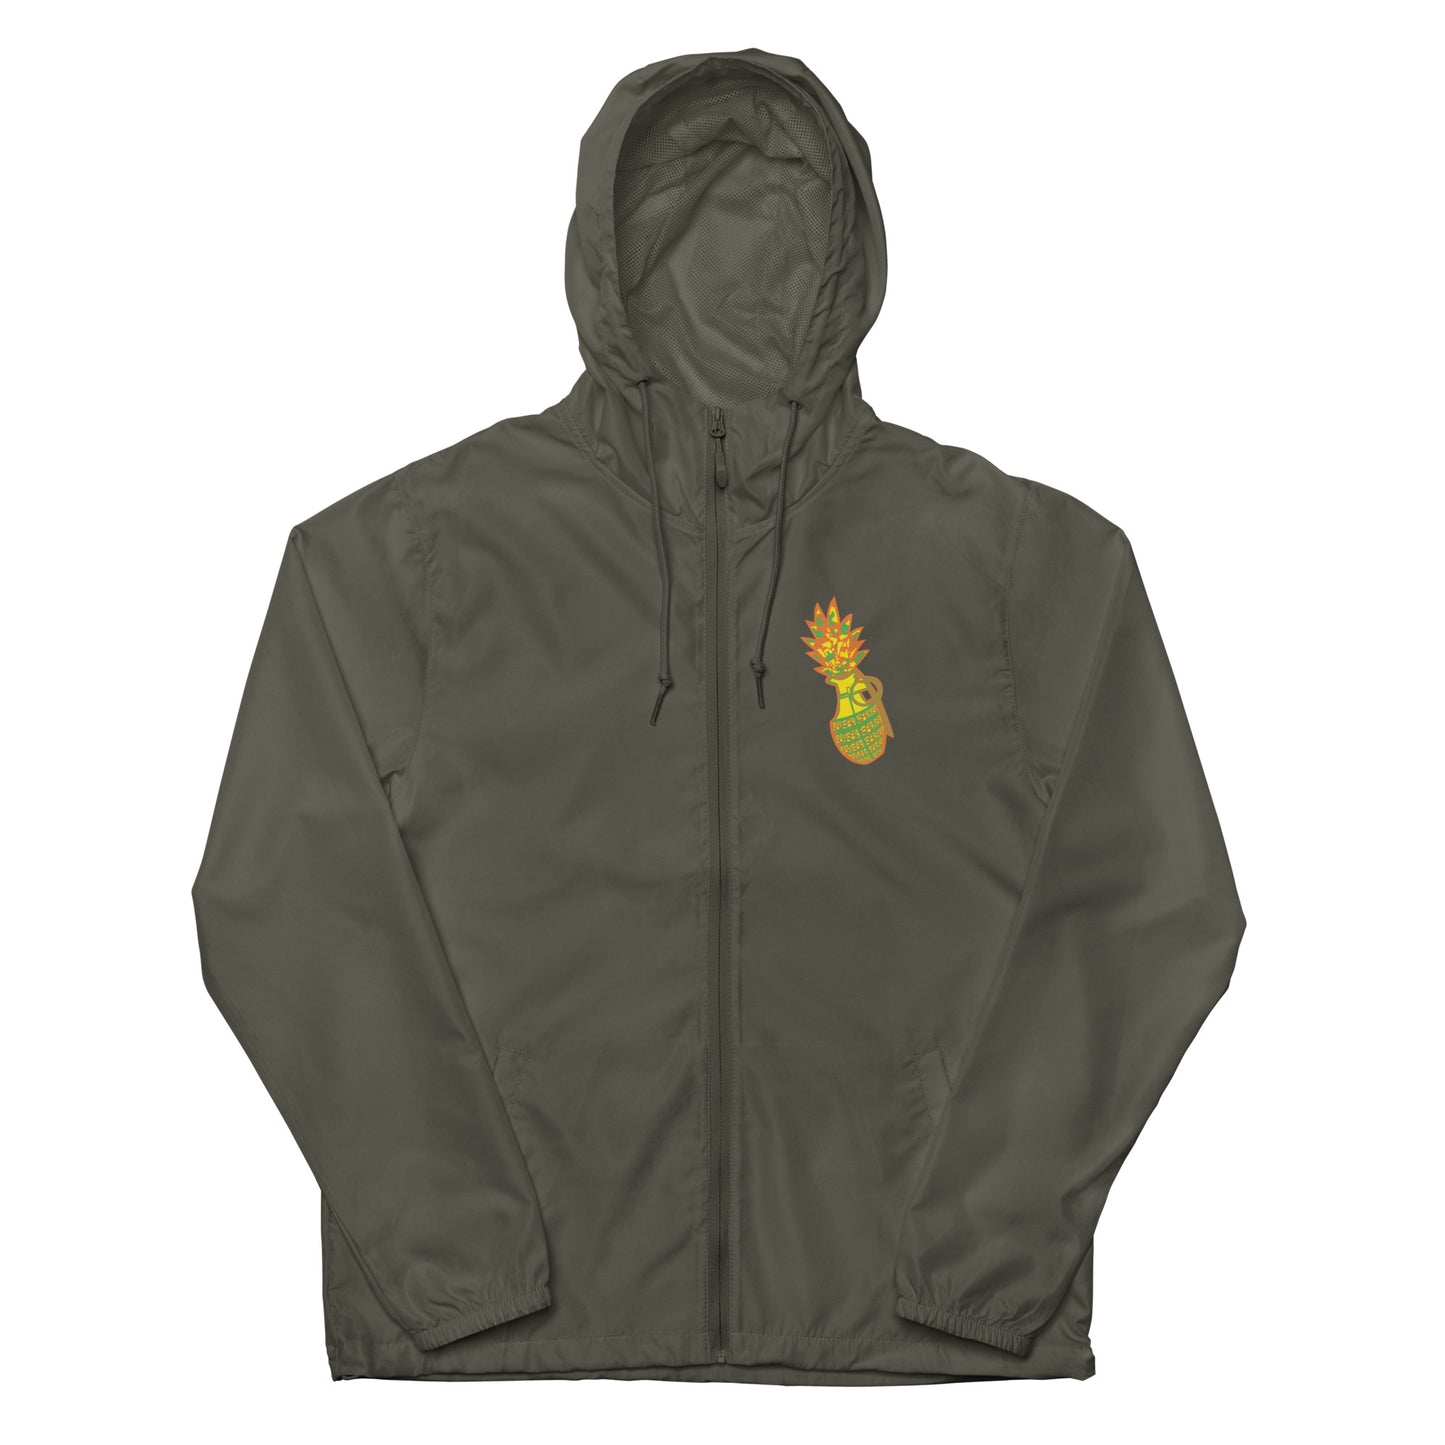 Unisex lightweight zip up windbreaker "The Real Pineapple Xpress" Tang Edition